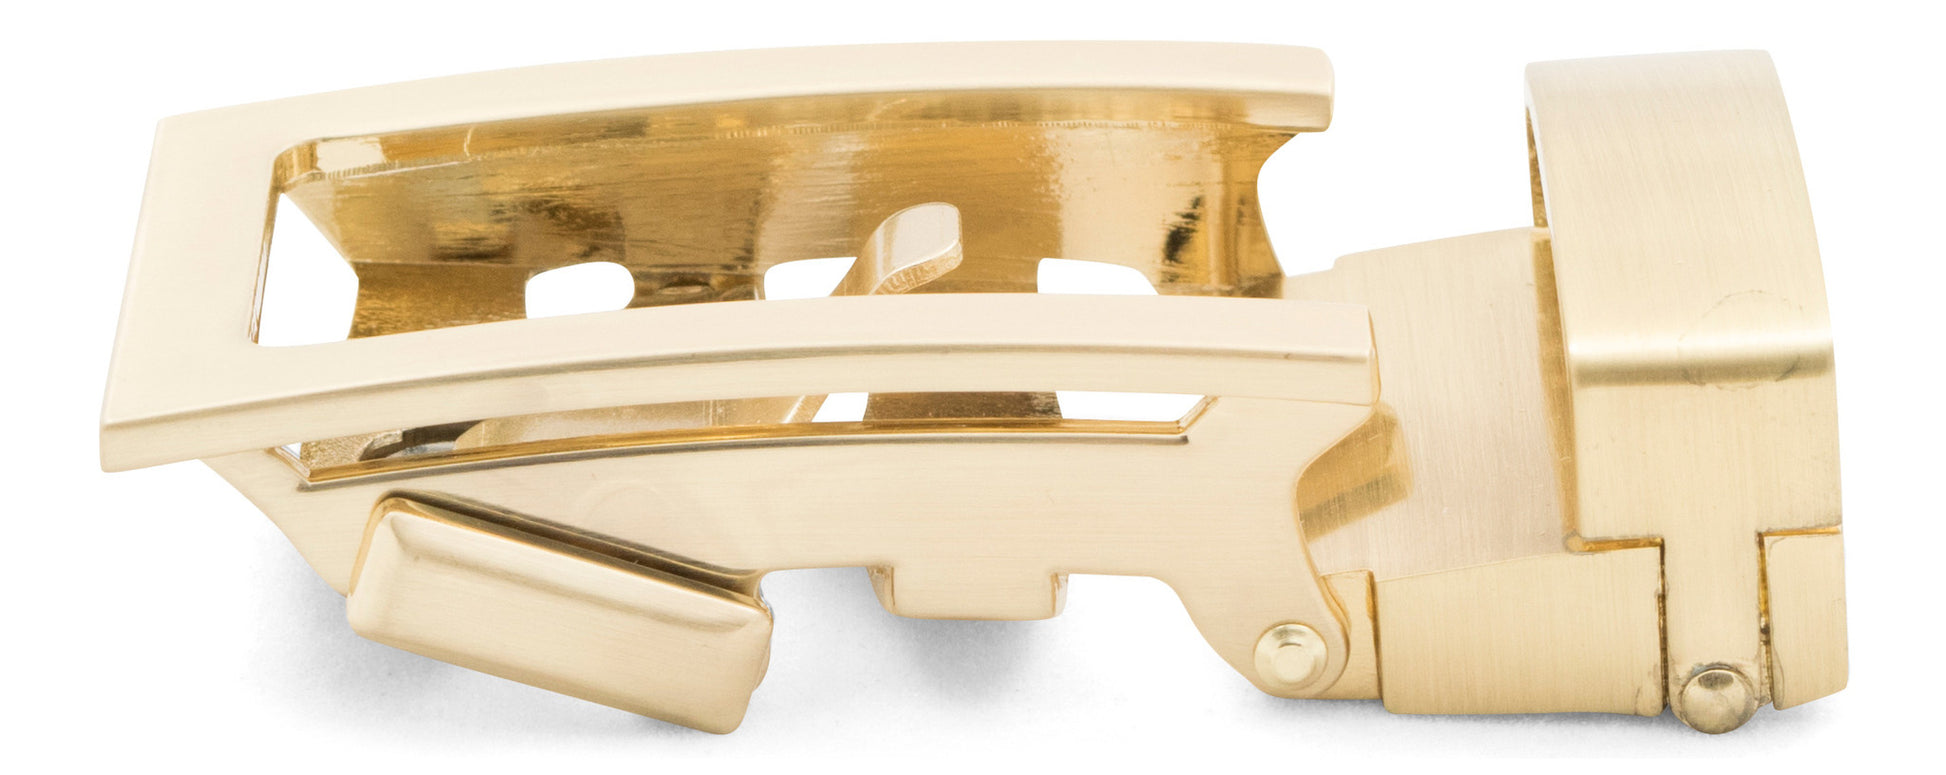 Men's traditional ratchet belt buckle in gold with a 1.25-inch width, left side view.